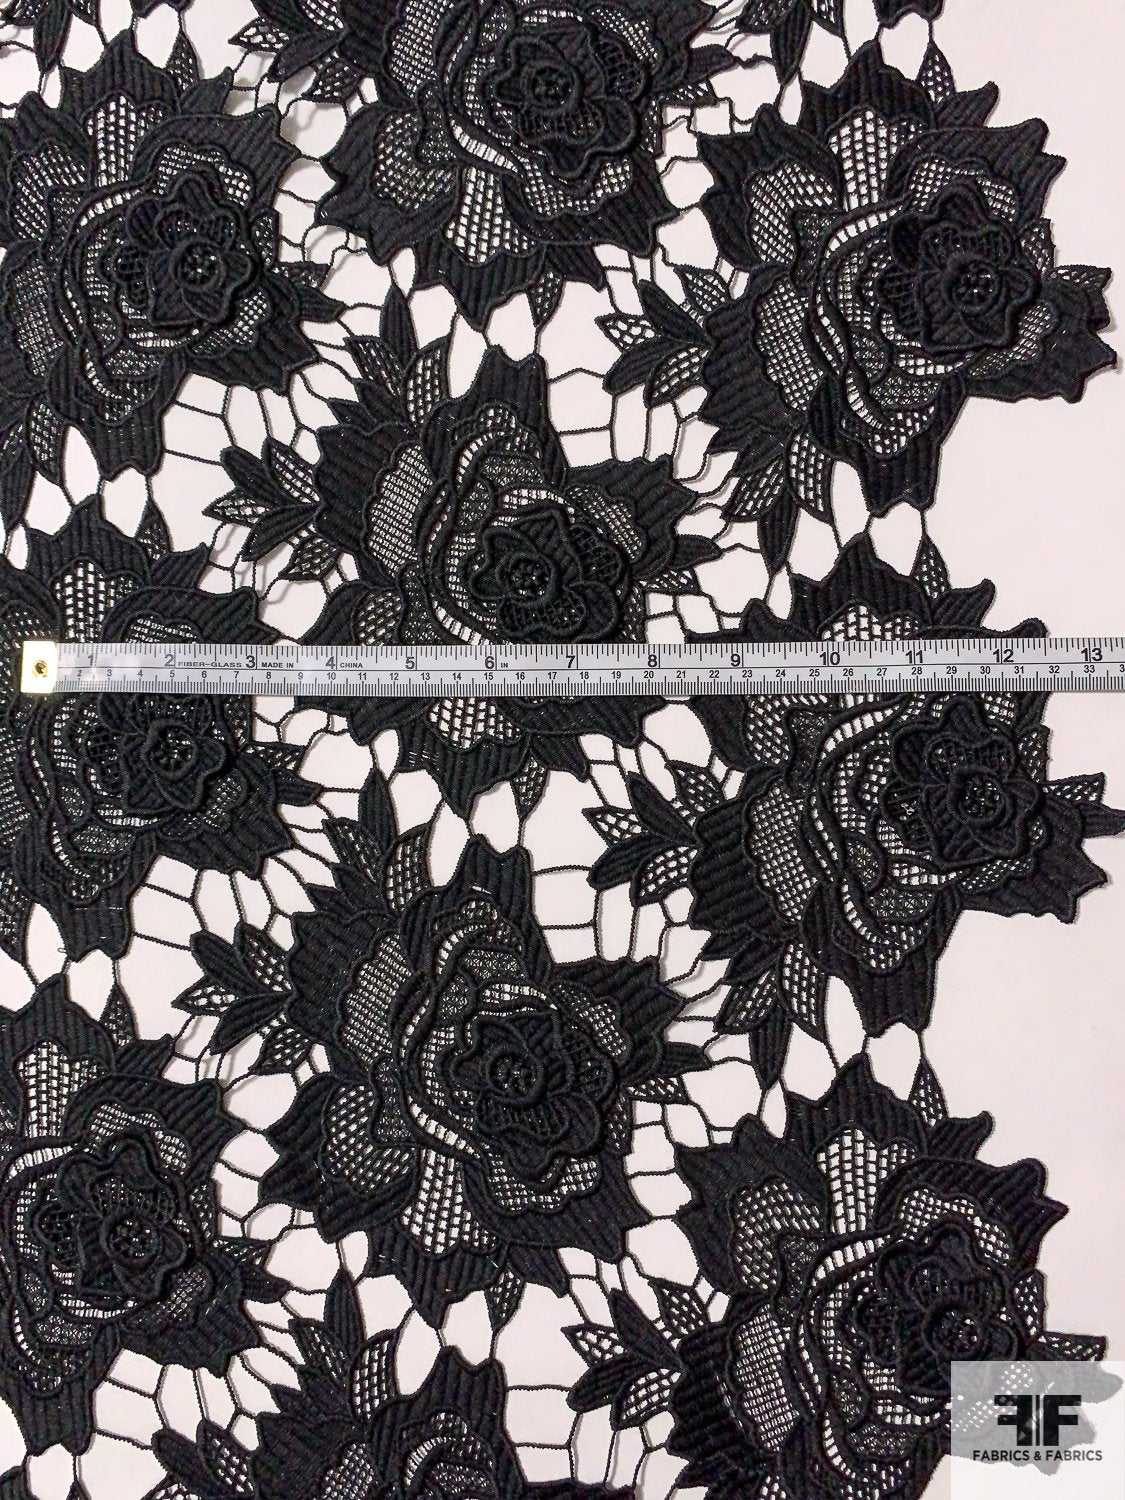 Made in Spain 3D Floral Burst Guipure Lace - Black